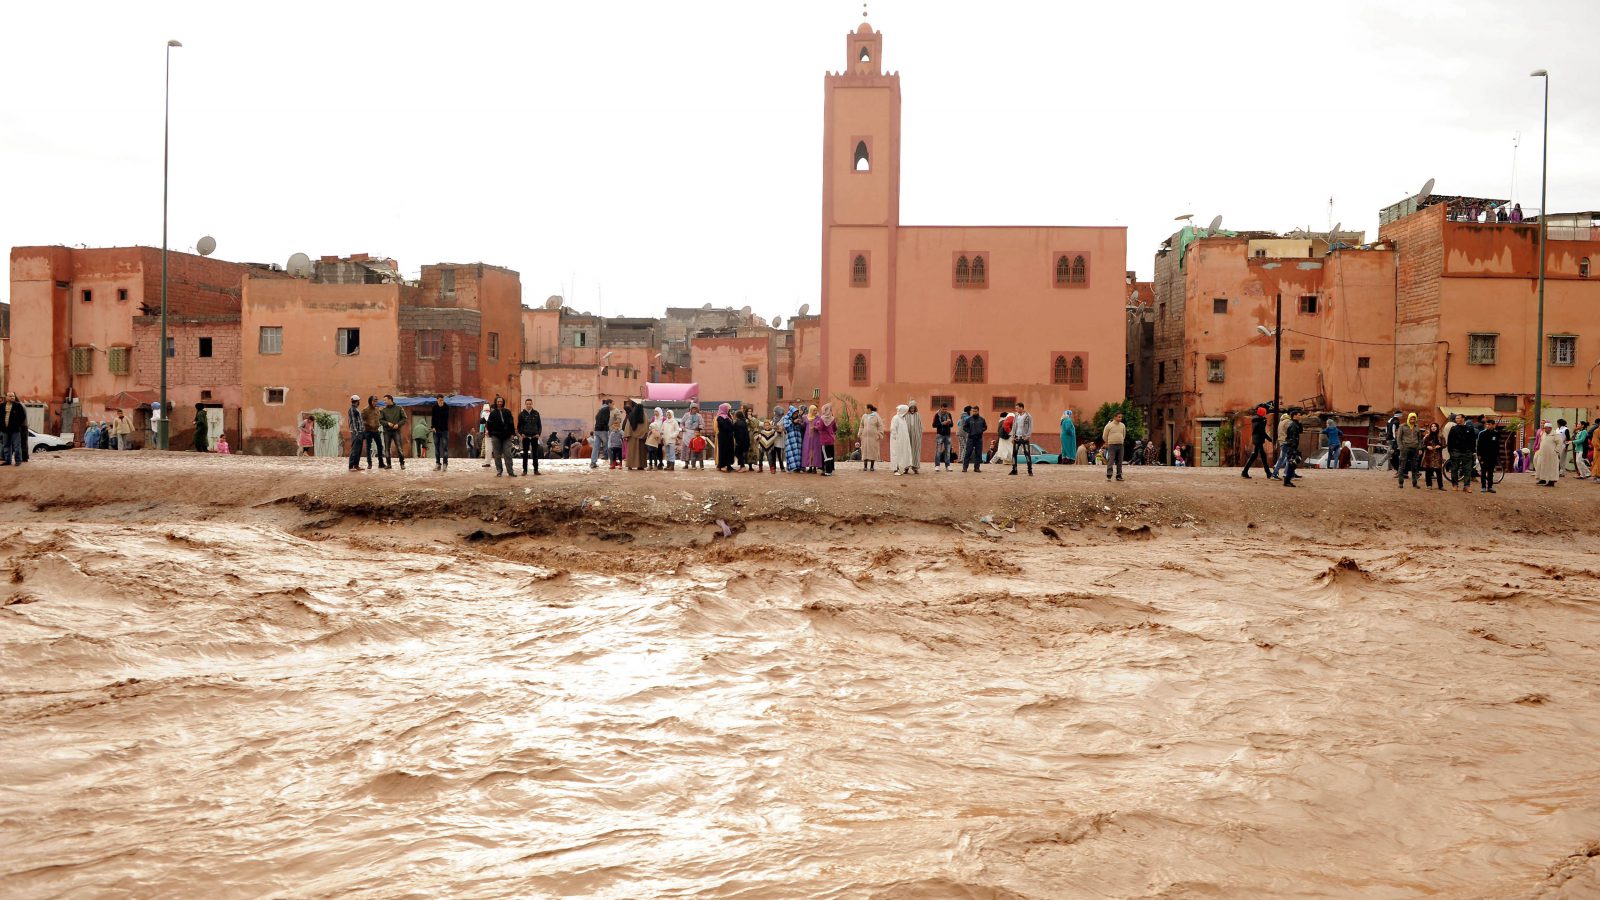  “INDAR”, a smart flood prediction and early warning system supported by the EU-funded Diafrikinvest programme (Rachid Tniwni)